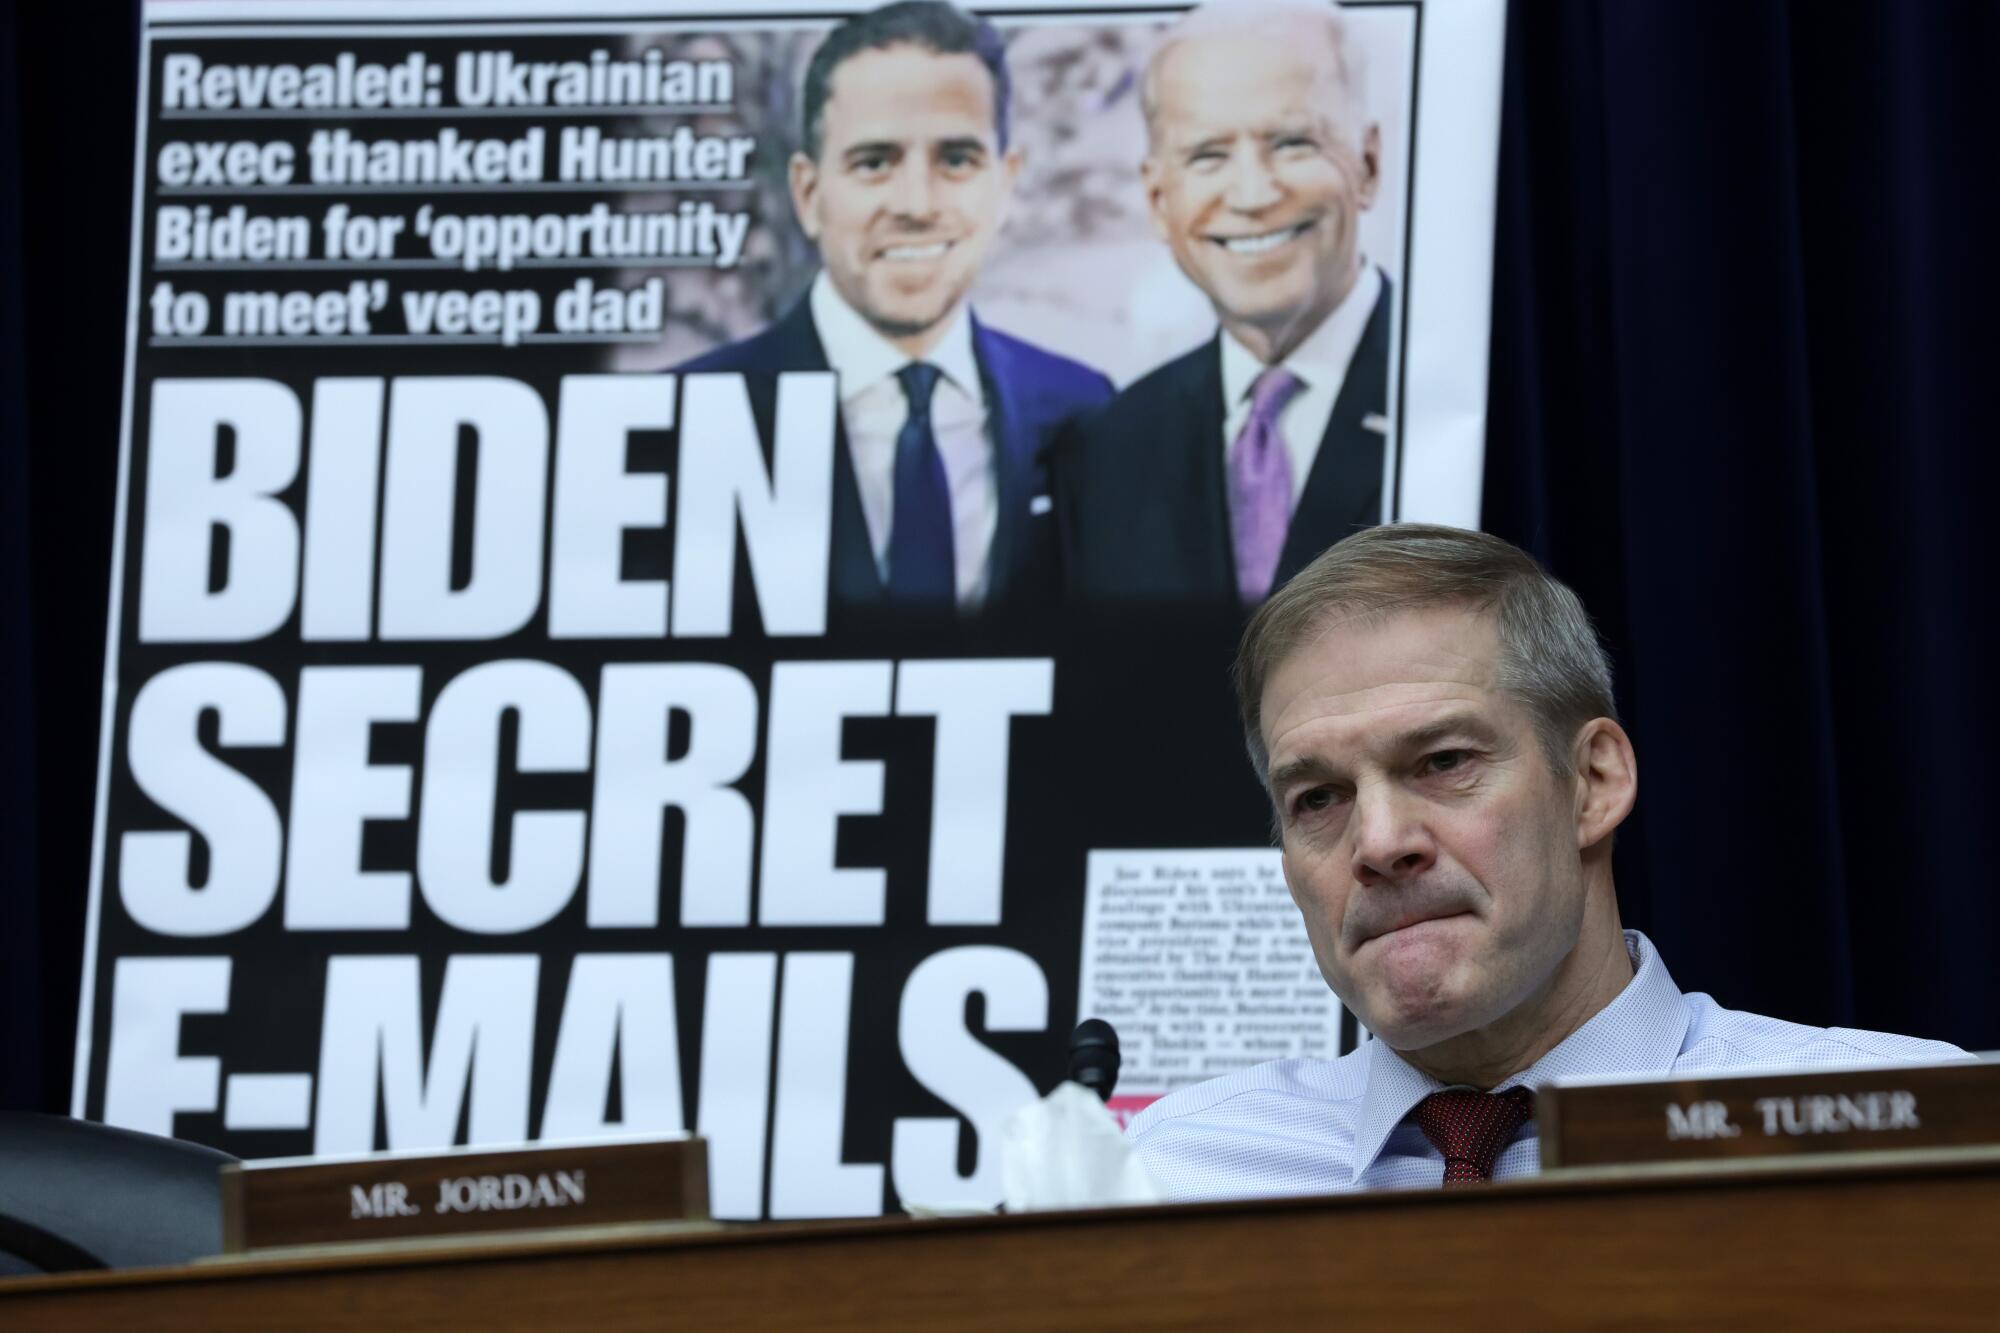 Jim Jordan seated on dais before an image of a tabloid showing President and Hunter Biden